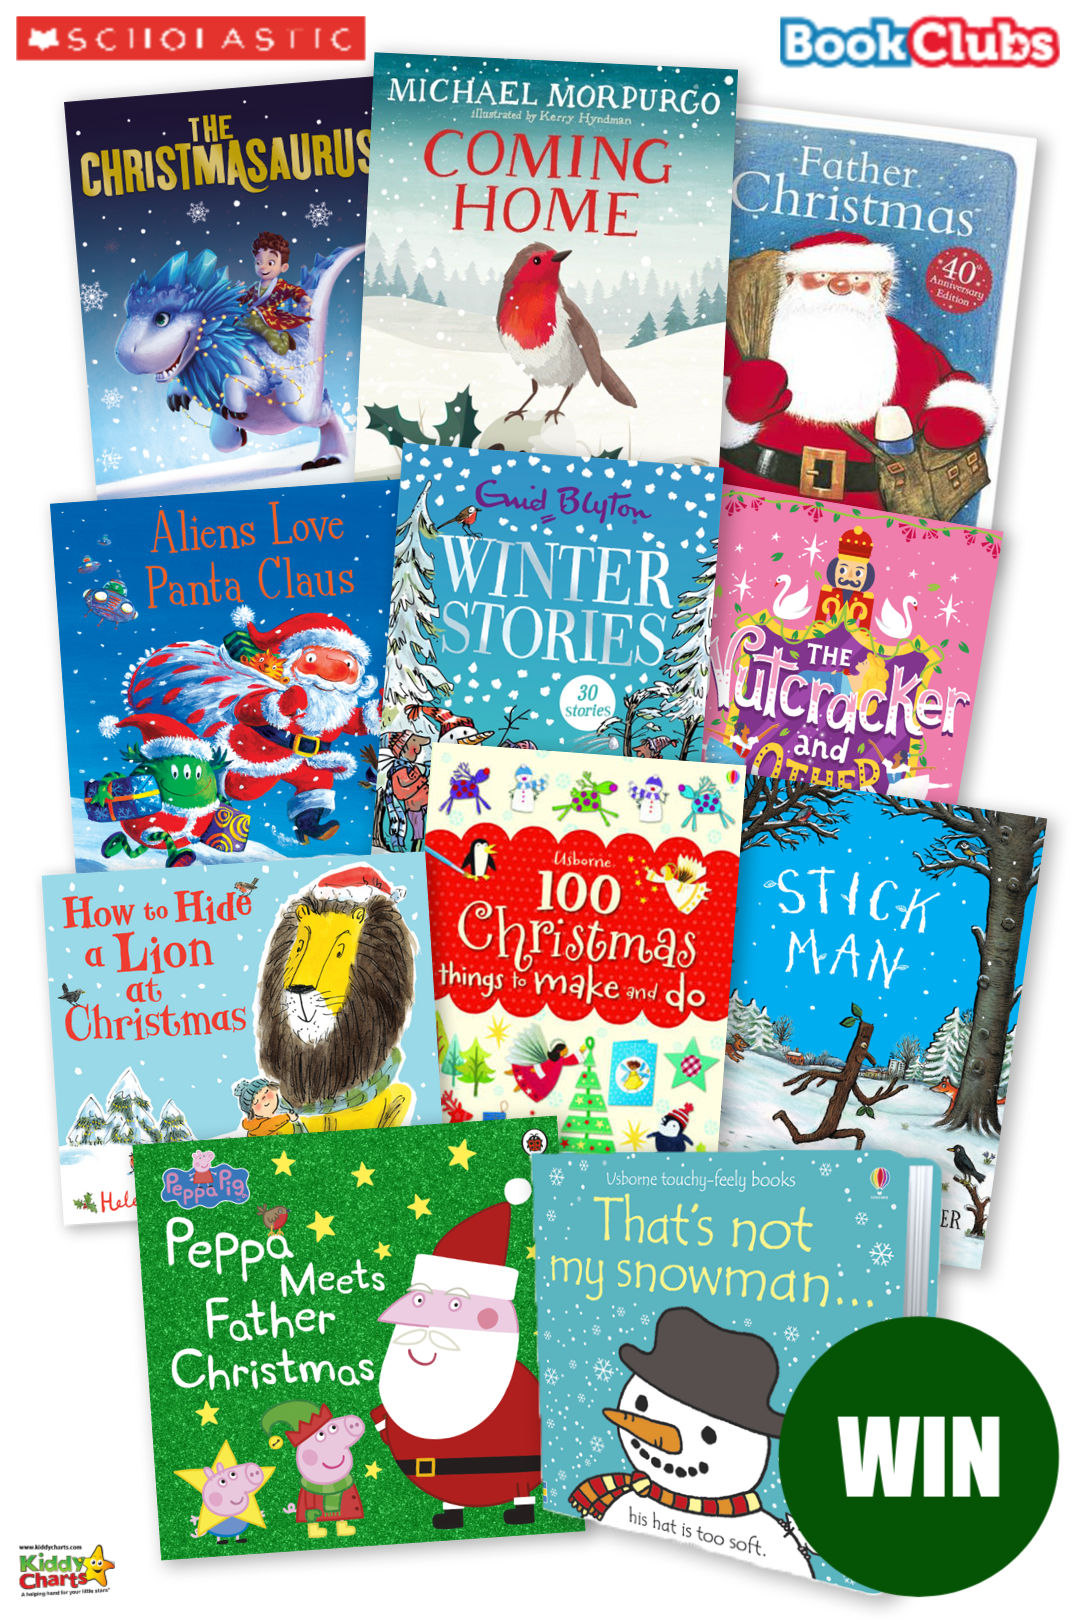 Win £75 of fabulous books from Scholastic - and visit the site for more great giveaways too! #giveaways #win #books #reading